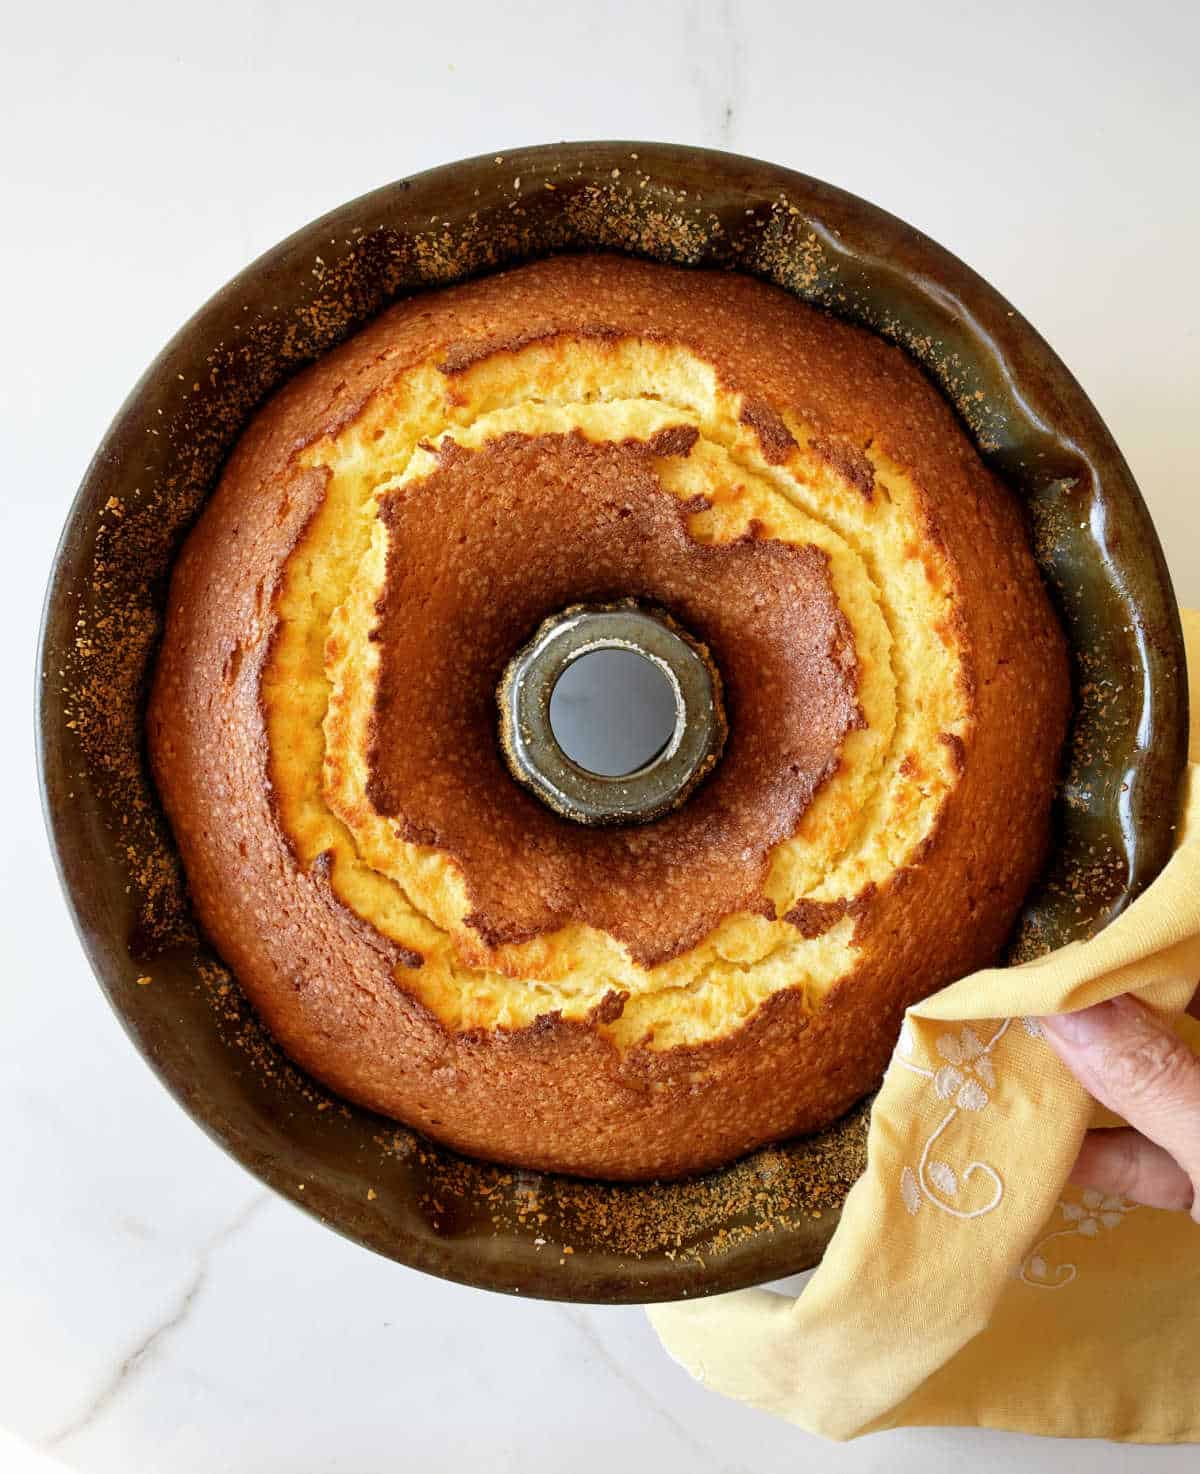 Top view of baked bundt cake in metal pan on white surface, yellow napkin